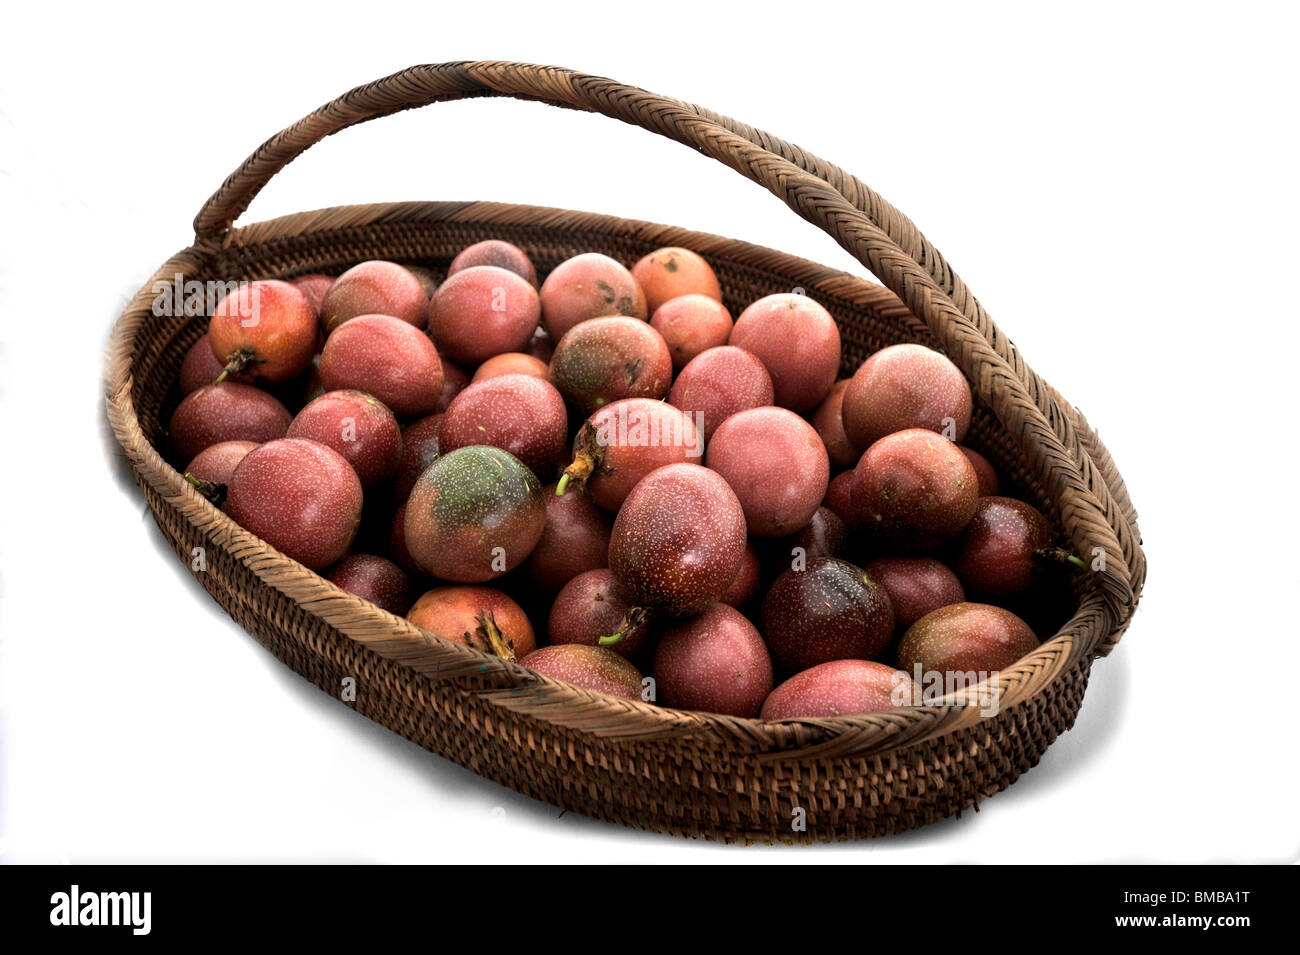 Ripe Passion-fruit in a basket Stock Photo